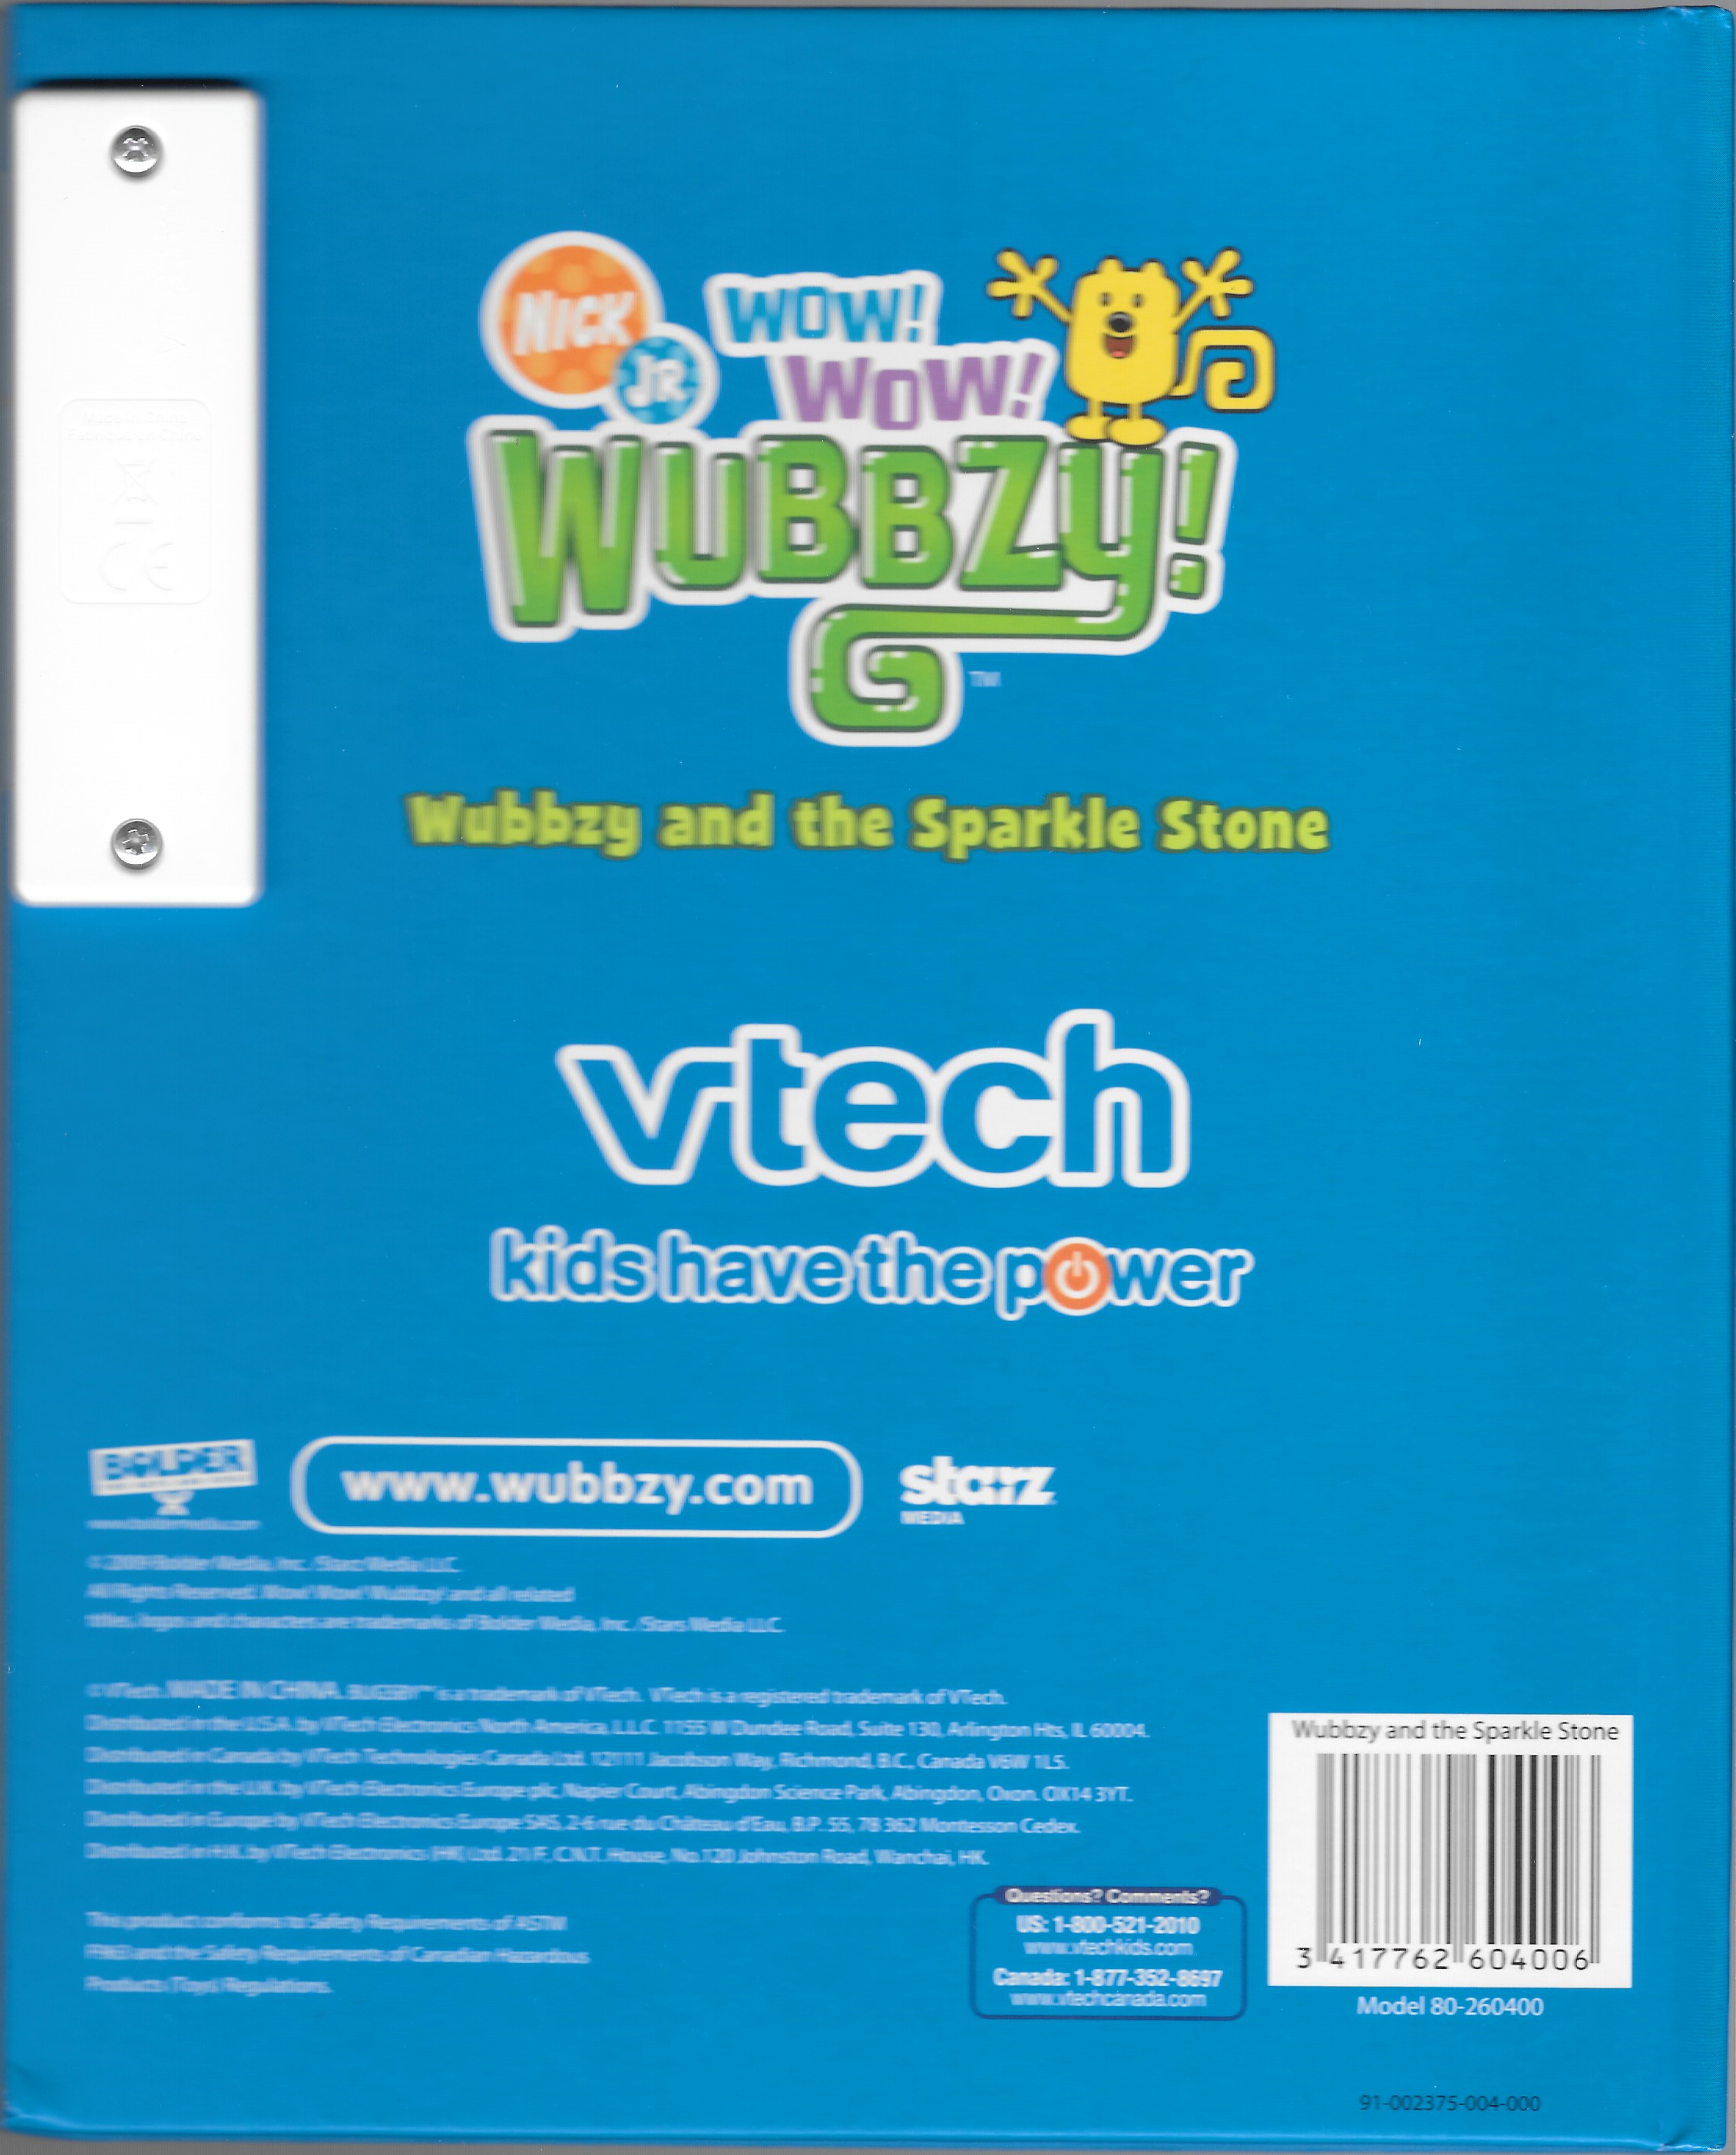 Vtech Bugsby Reading System Wow Wow Wubbzy and the Sparkle Stone New!